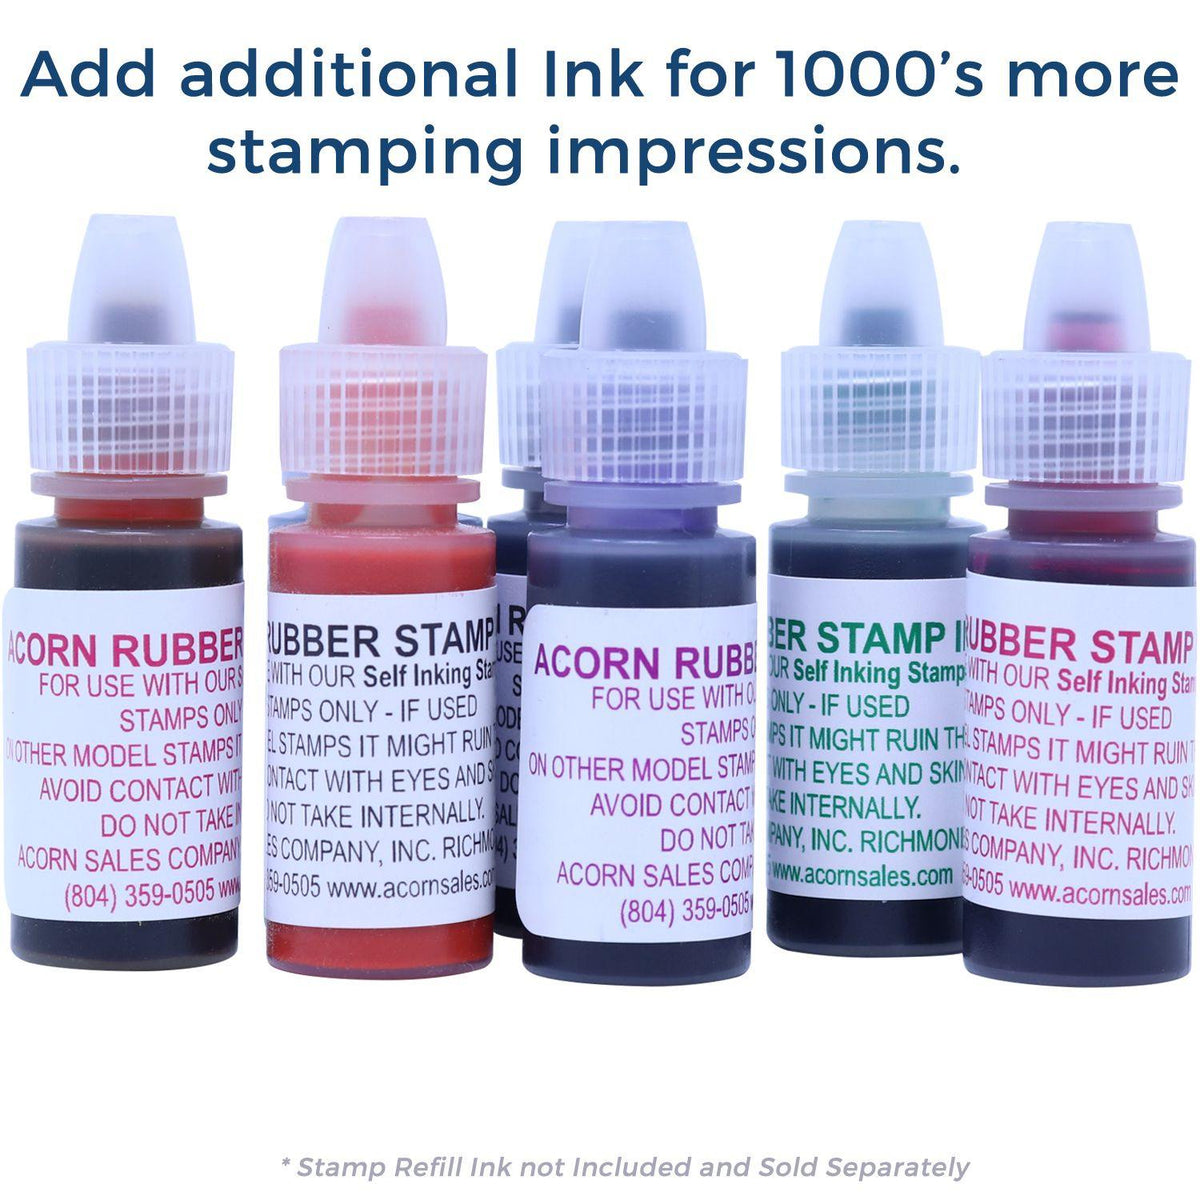 Refill Inks for Large Pre-Inked Top Secret Stamp Available